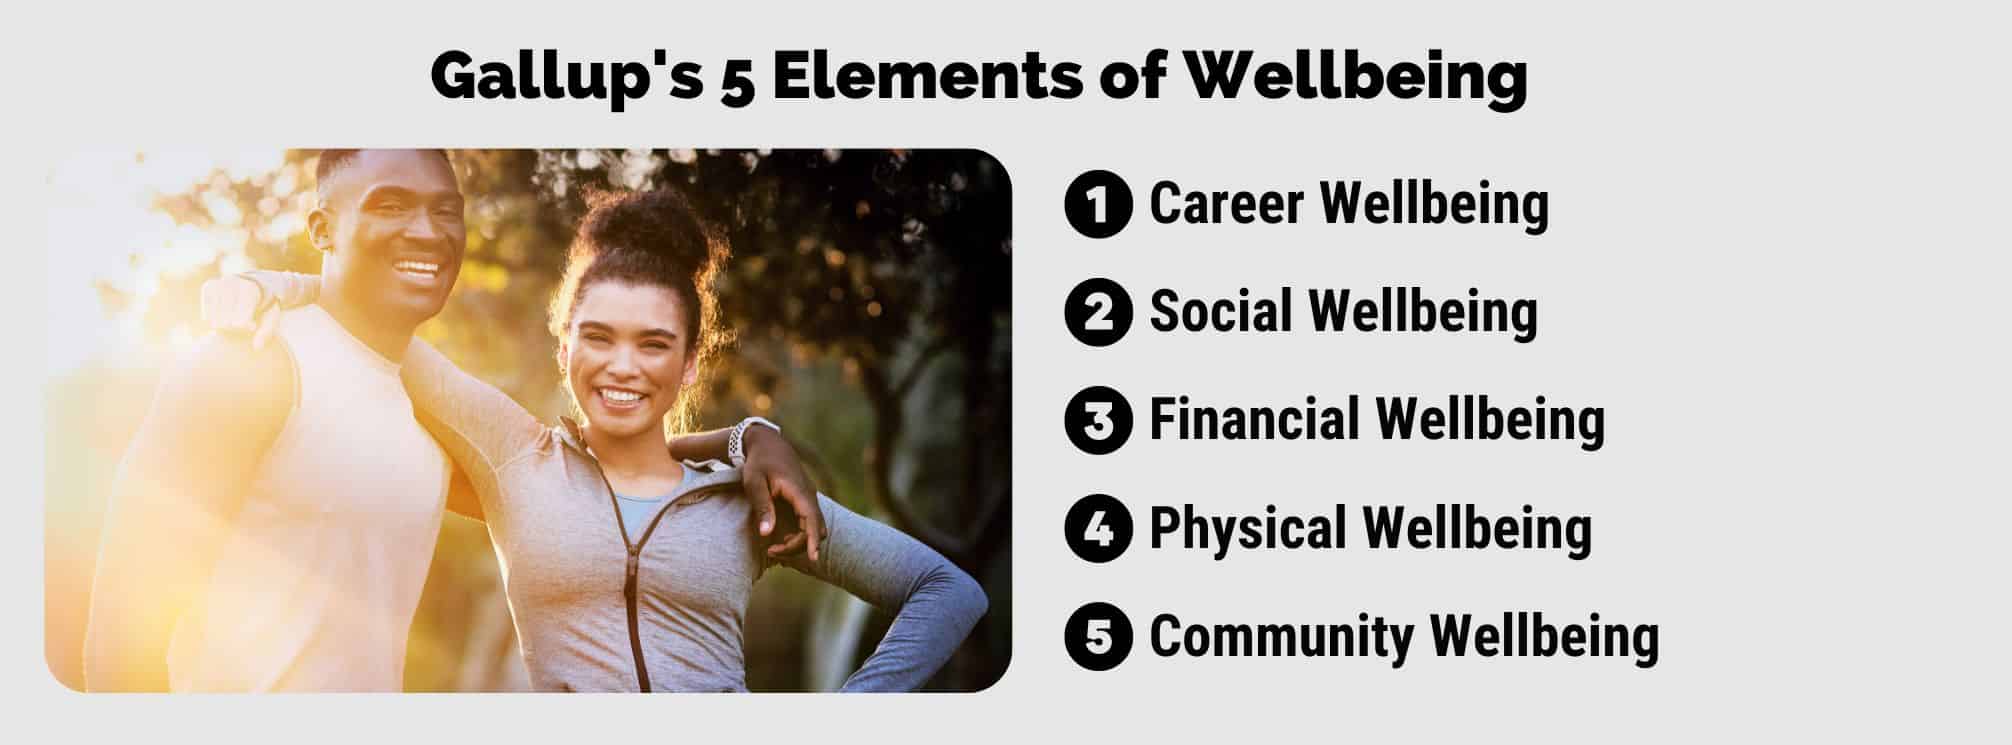 Image of two fit, healthy people who look happy besides the text "Gallup's 5 Elements of Wellbeing" listing out career, social, financial, physical, and community